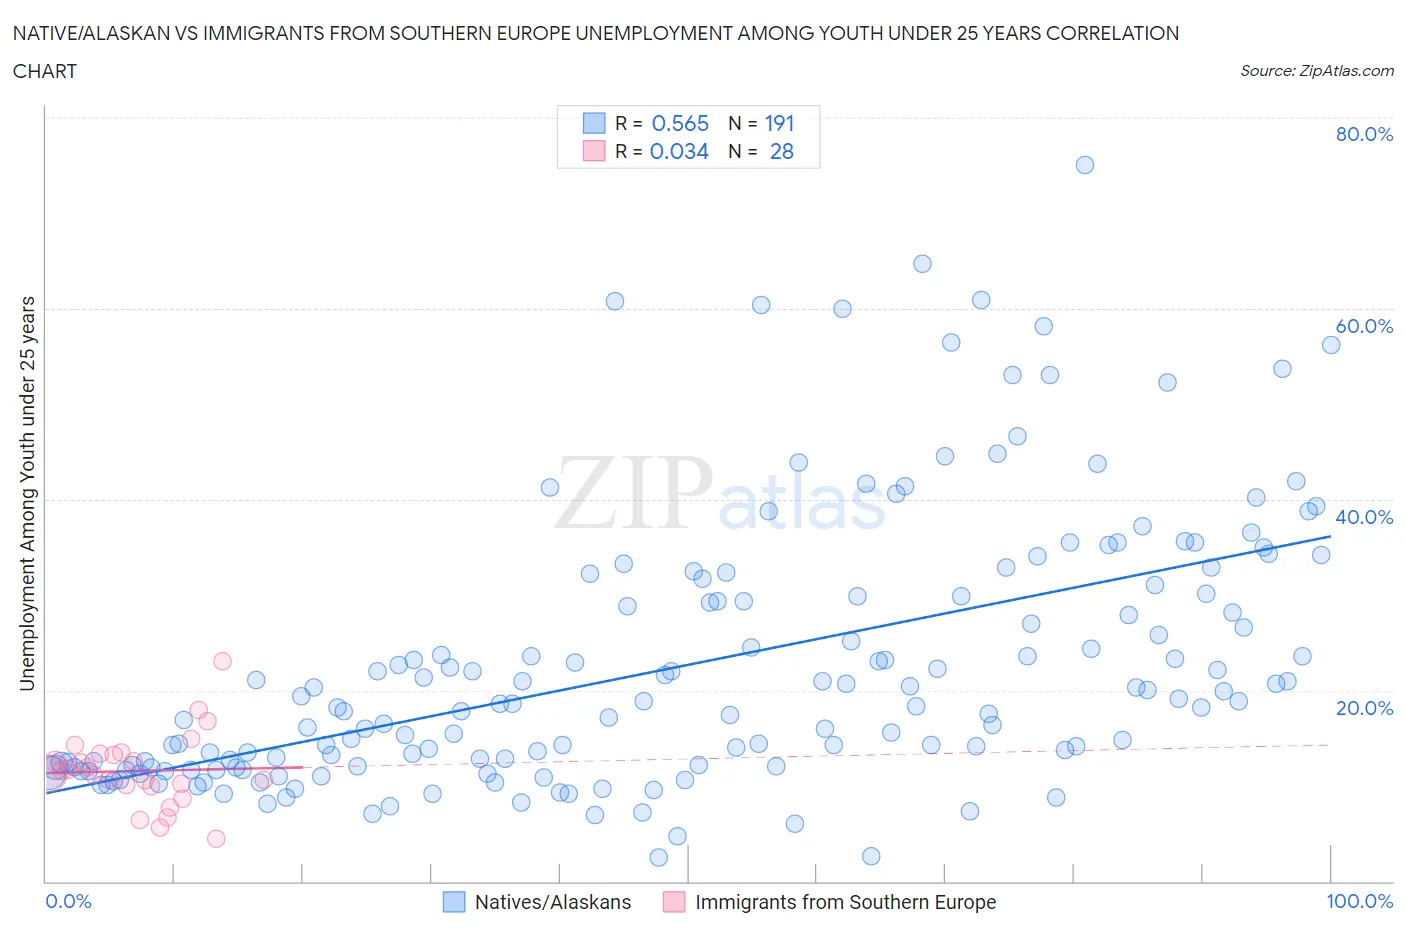 Native/Alaskan vs Immigrants from Southern Europe Unemployment Among Youth under 25 years